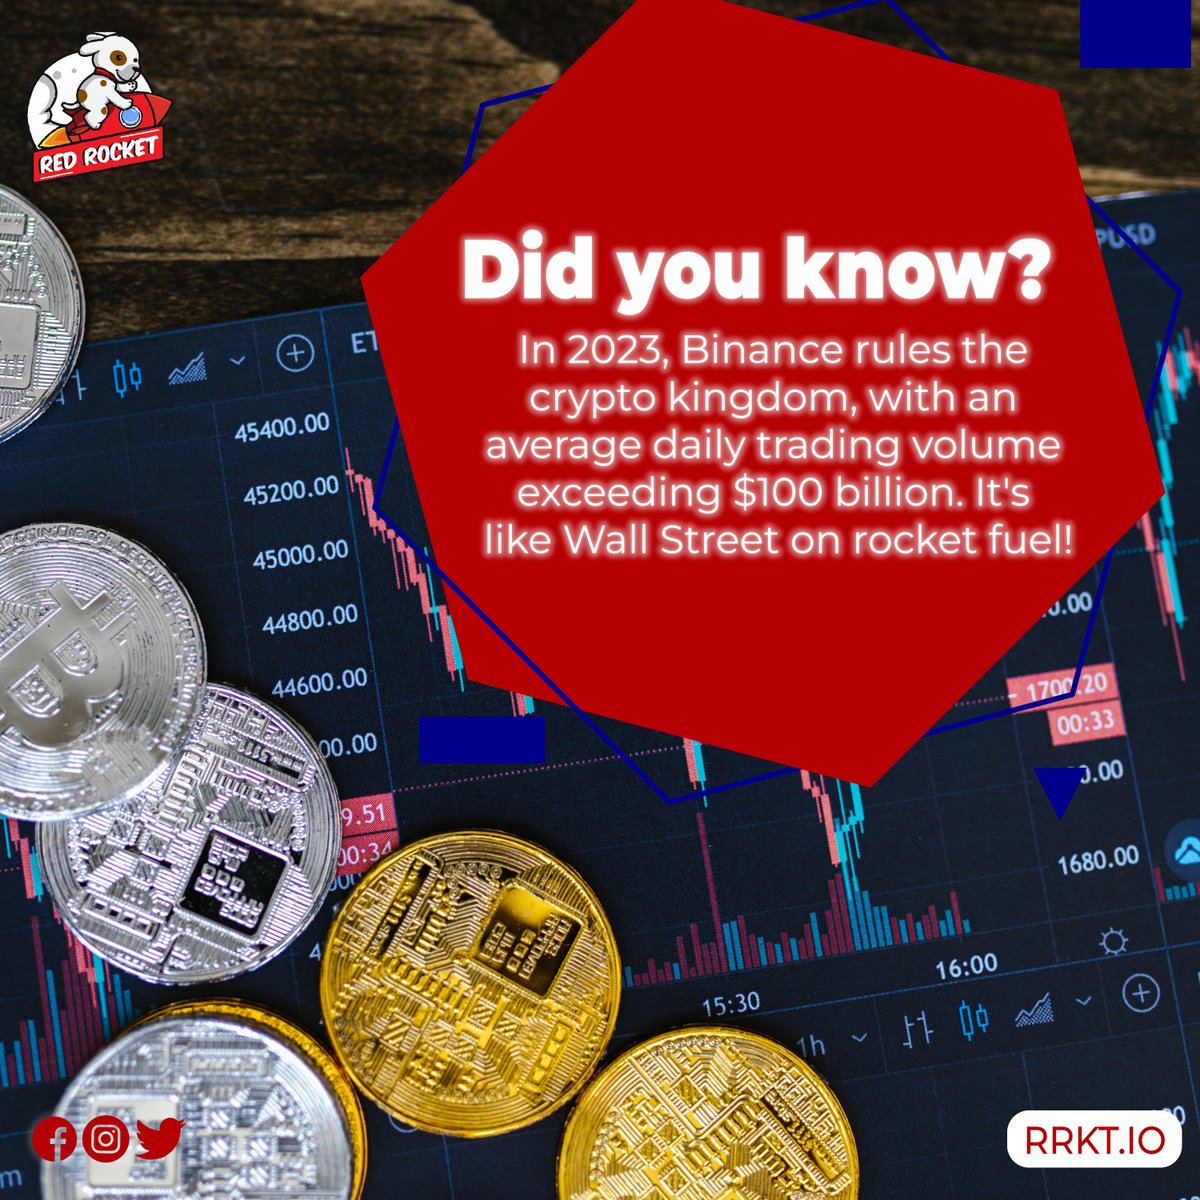 In 2023, Binance rules the crypto kingdom, with an average daily trading volume exceeding $100 billion. It's like Wall Street on rocket fuel!' 🚀🏦
.
Visit our website 👉 rrkt.io
.
#websiteanalytics #conversionrateoptimization #trafficstrategy #webdesign #seotips